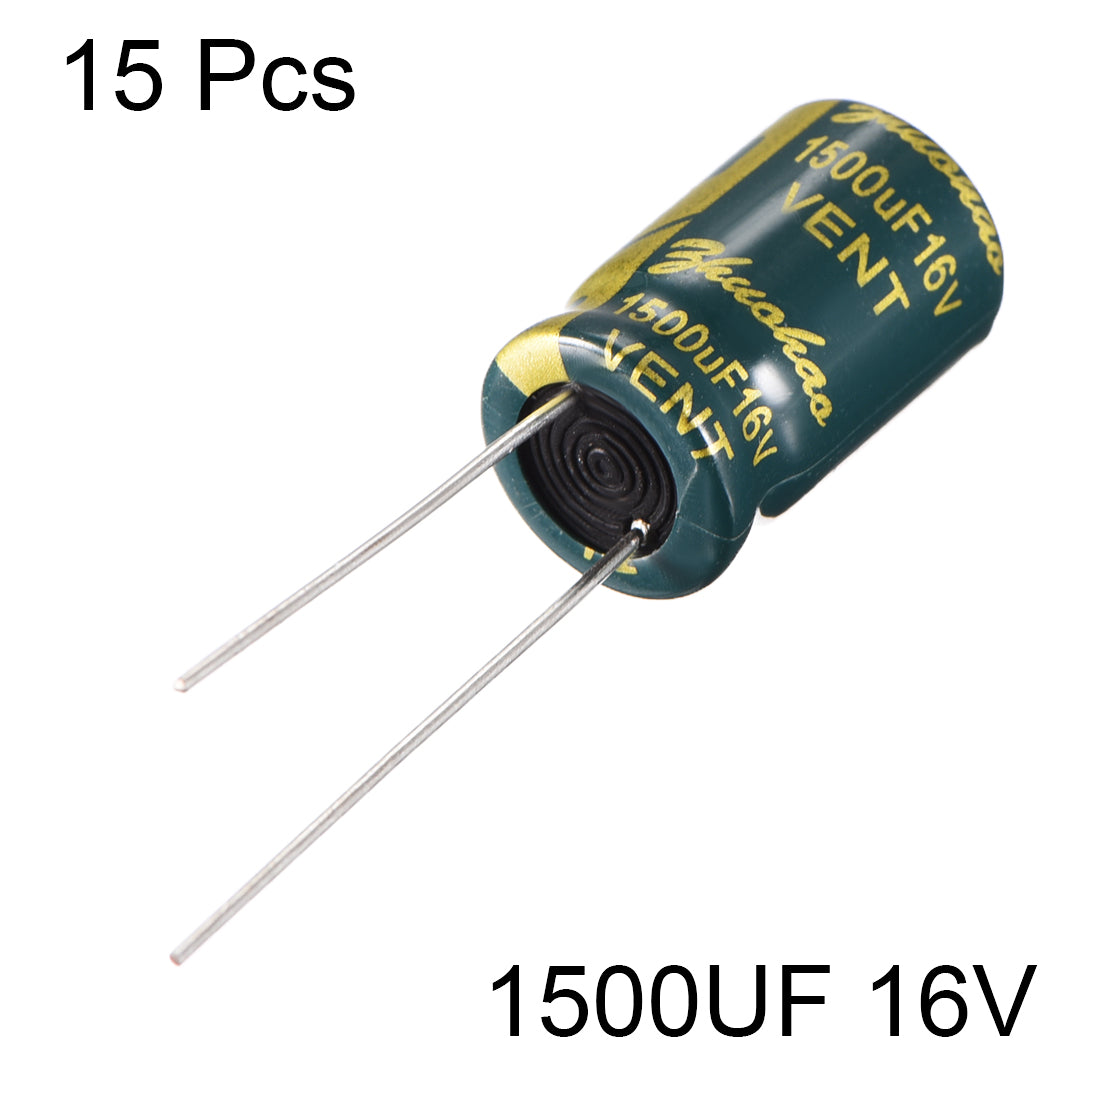 uxcell Uxcell Aluminum Radial Electrolytic Capacitor Low ESR Green with 1500UF 16V 105 Celsius Life 3000H 10 x 17 mm High Ripple Current,Low Impedance 15pcs